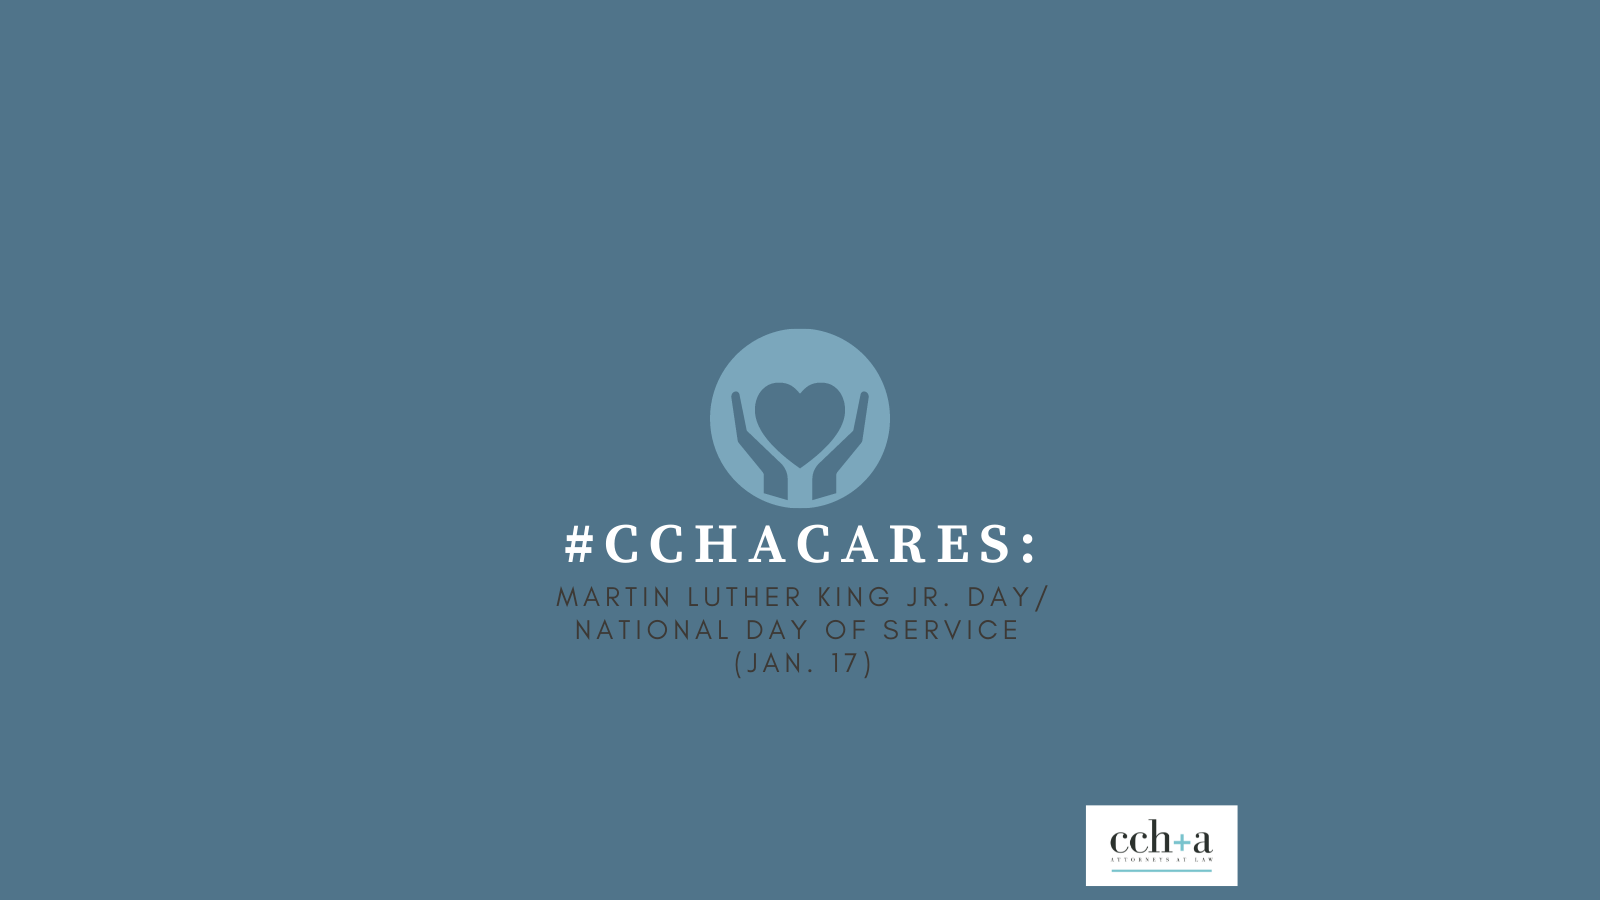 CCHA Cares MLK Day National Day of Service Jan 17 blogtwitter